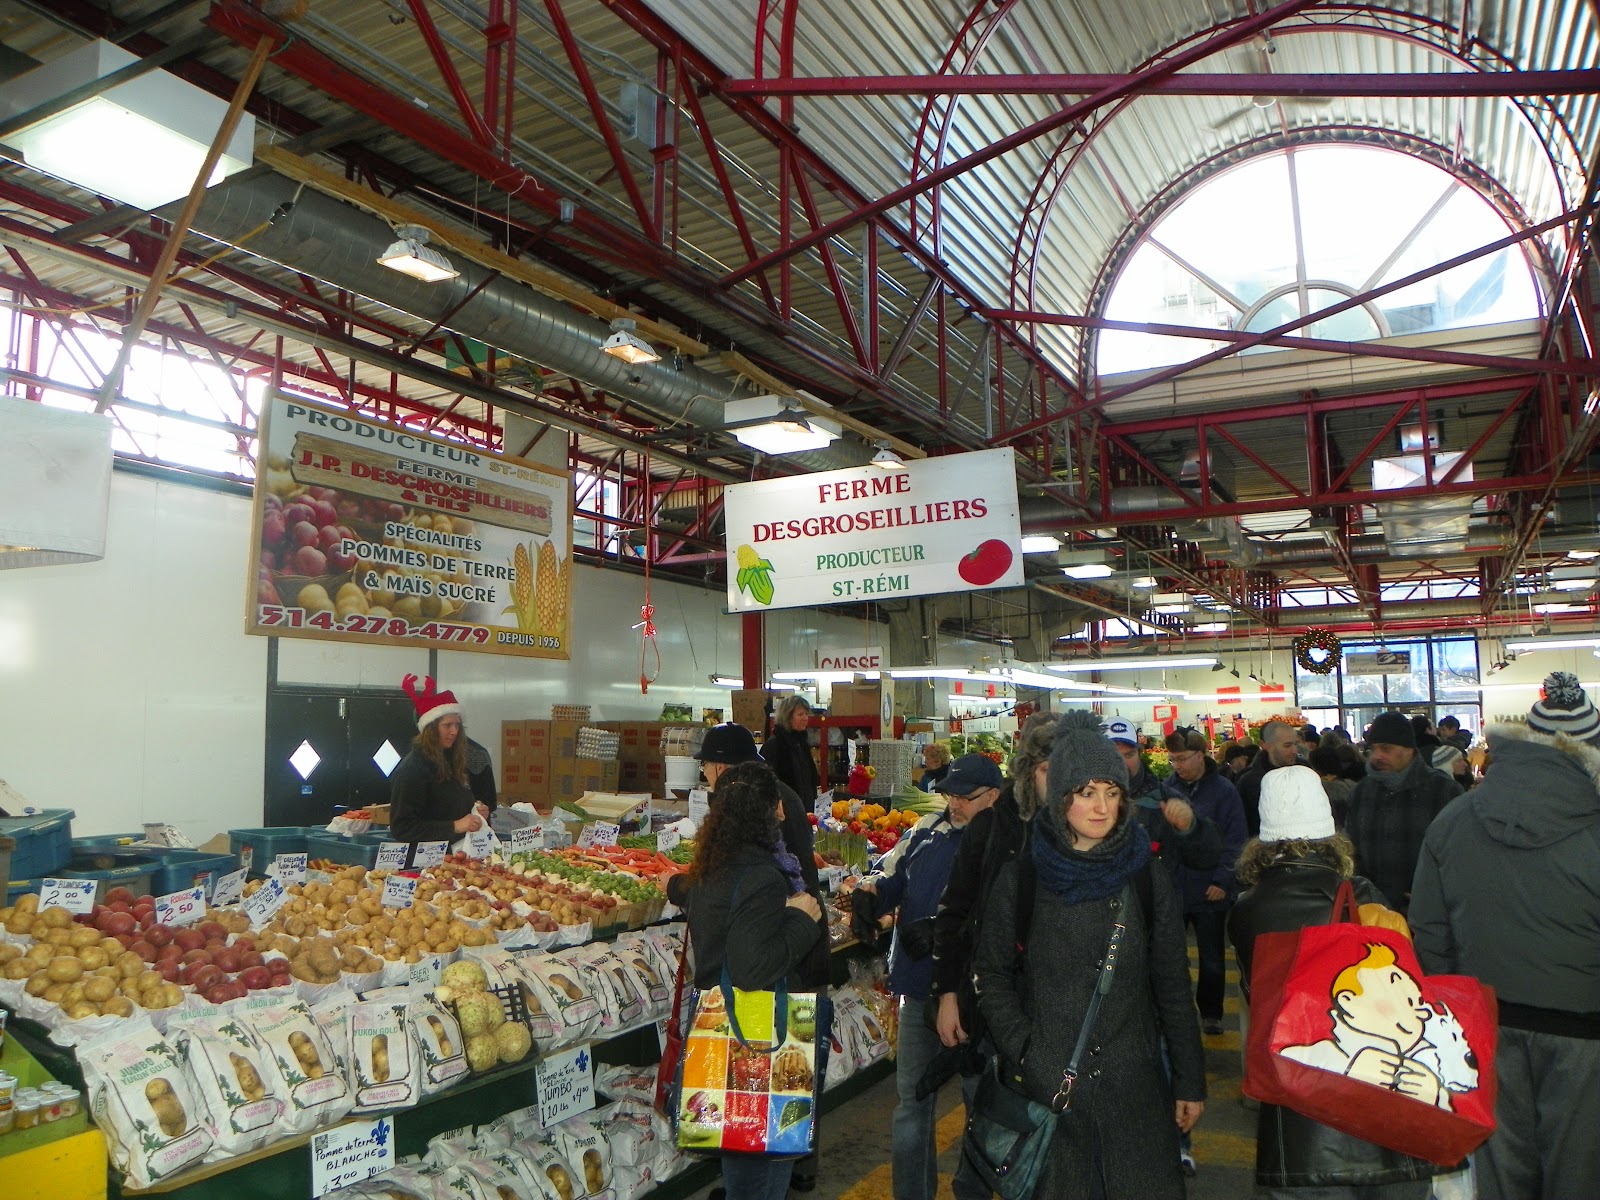 Here are some photos I took a the market.